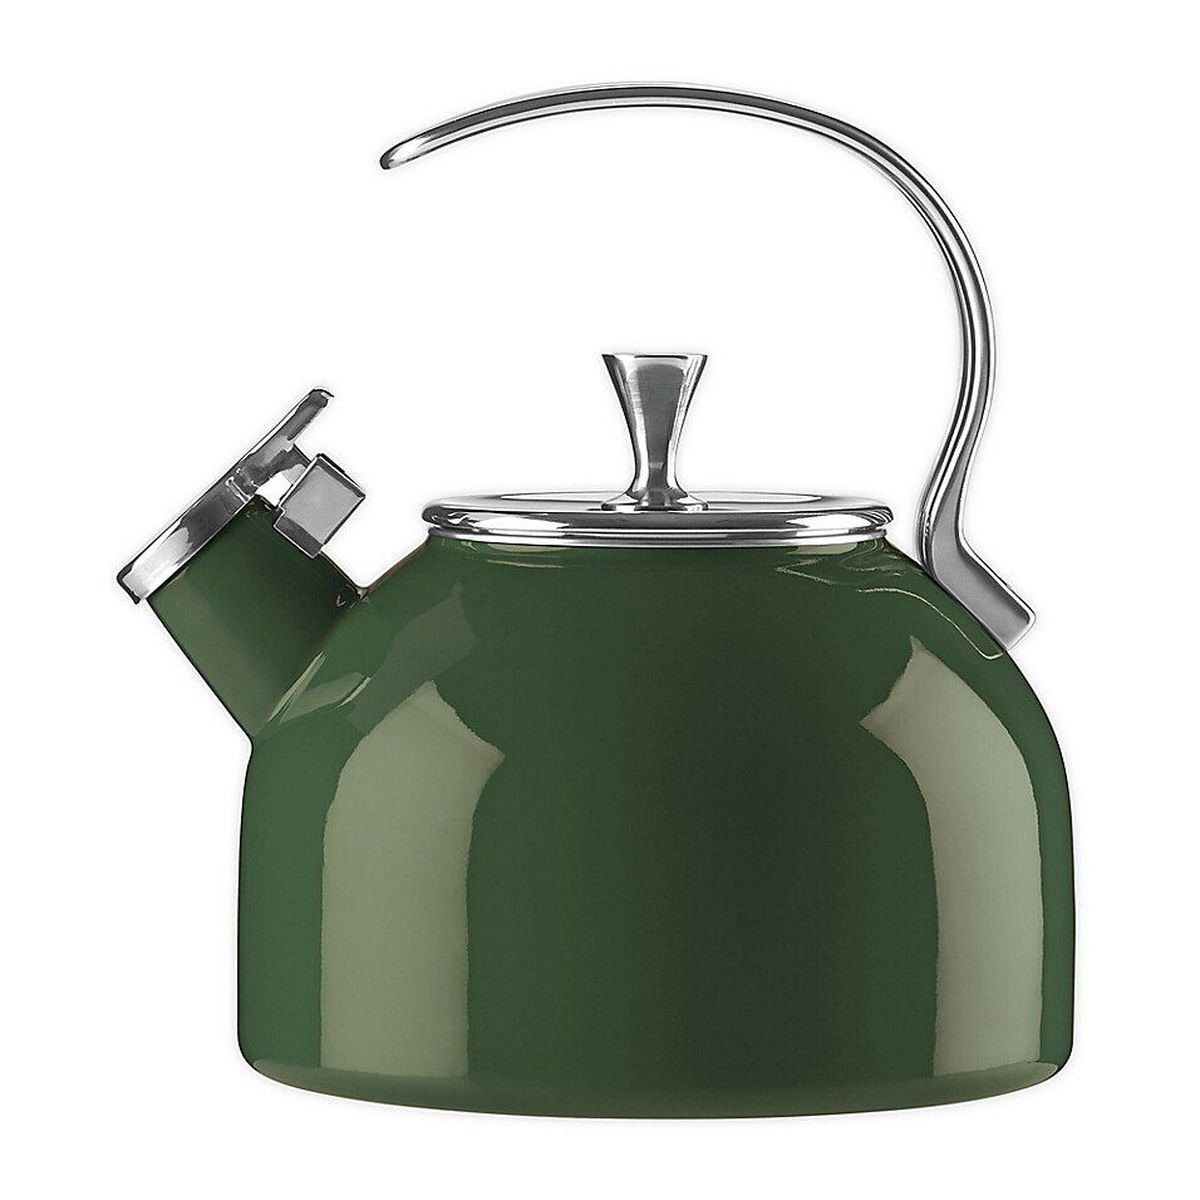 Green kettle with chrome finishes. 